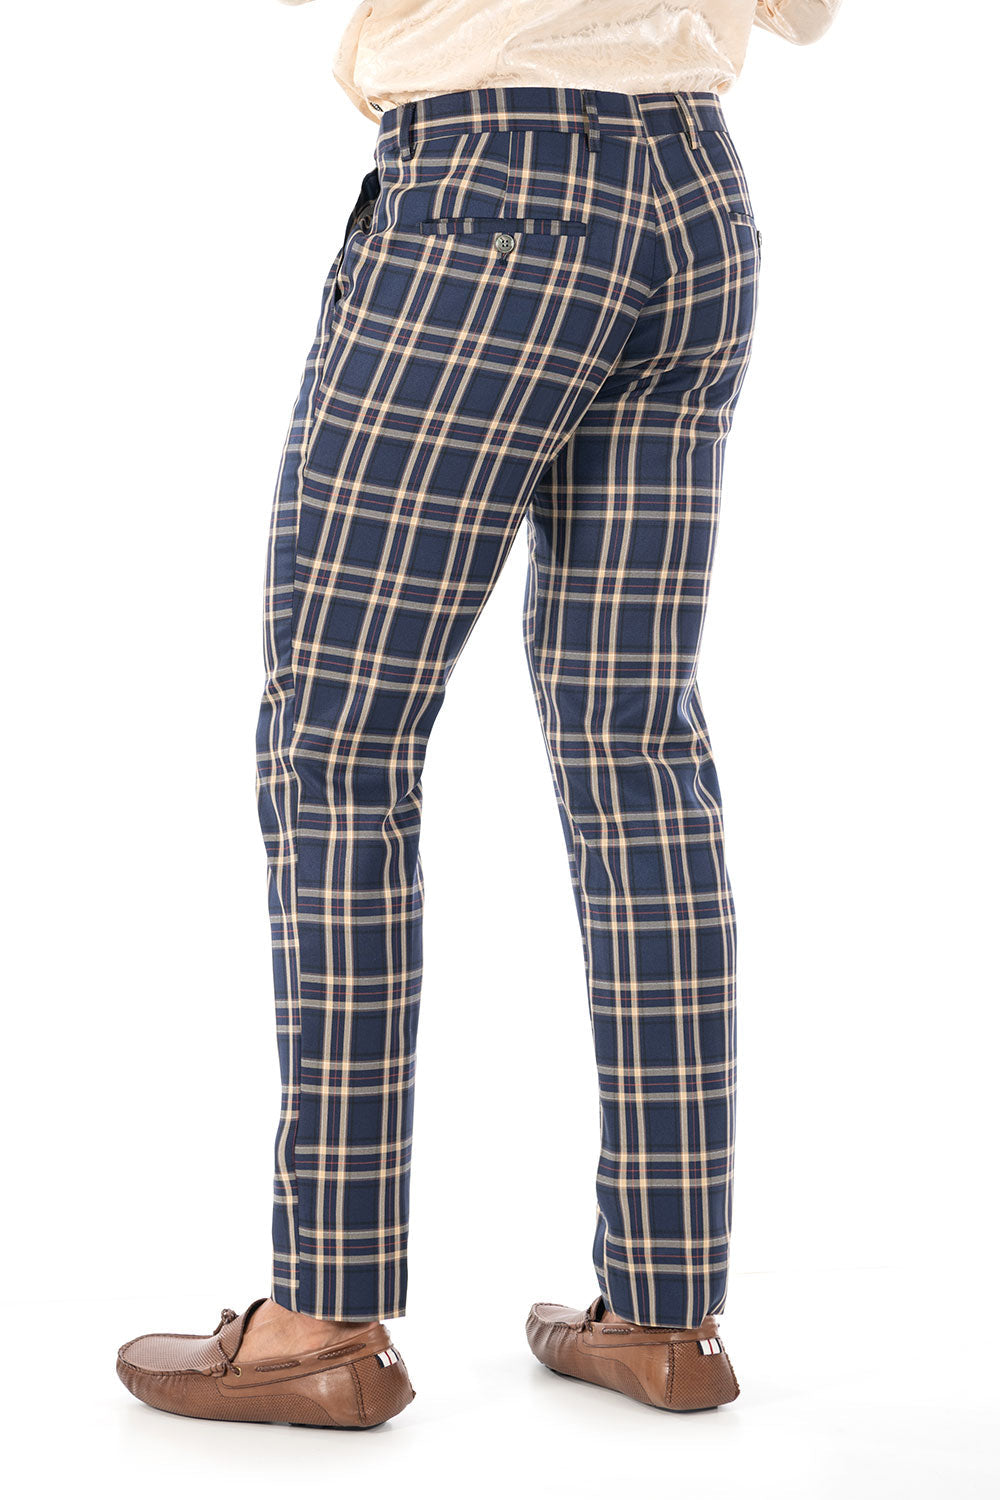 BARABAS men's checkered plaid navy and beige chino pants CP61